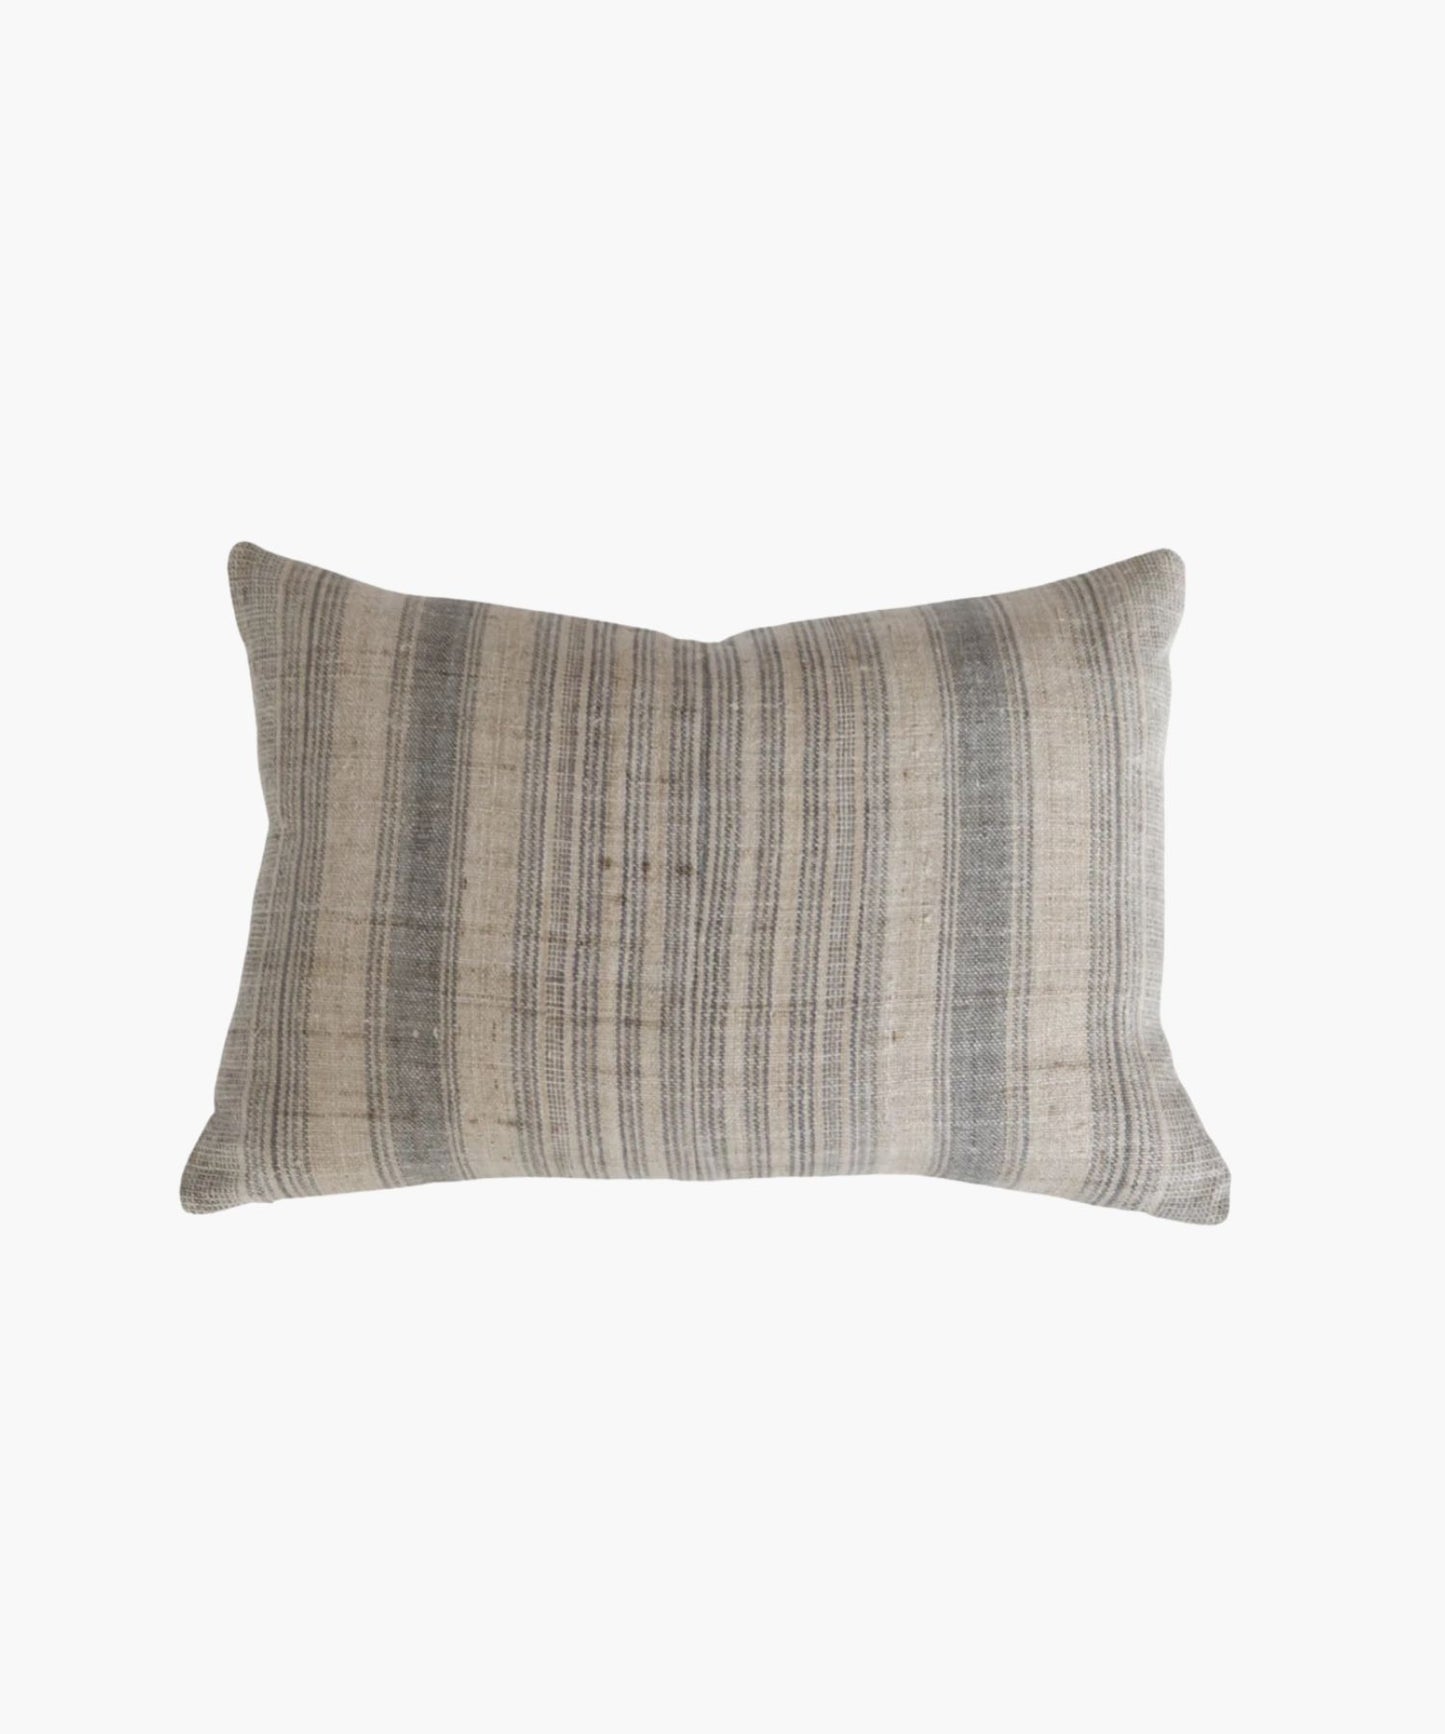 Ivy Pillow Cover, Gray